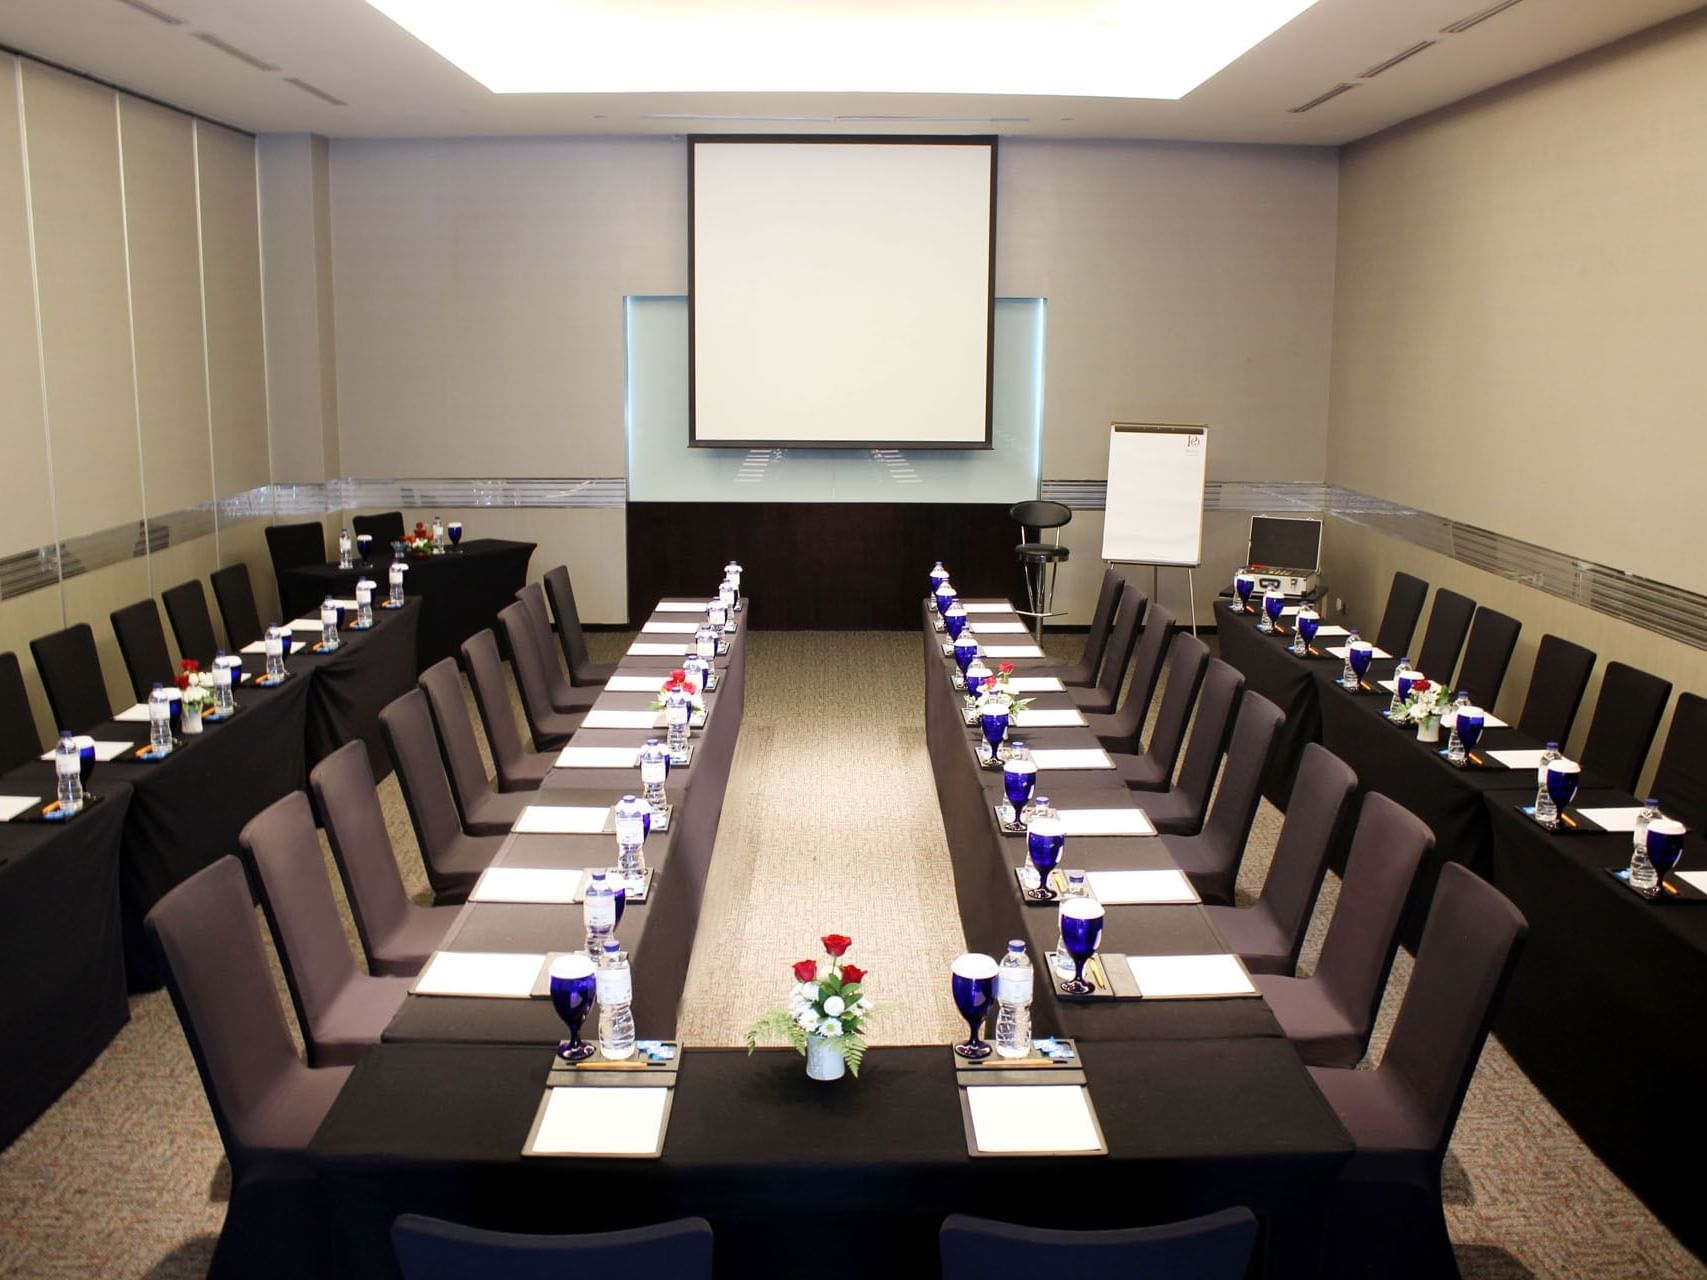 U shape tables arranged with projector screen in Meeting Room at Po Hotel Semarang